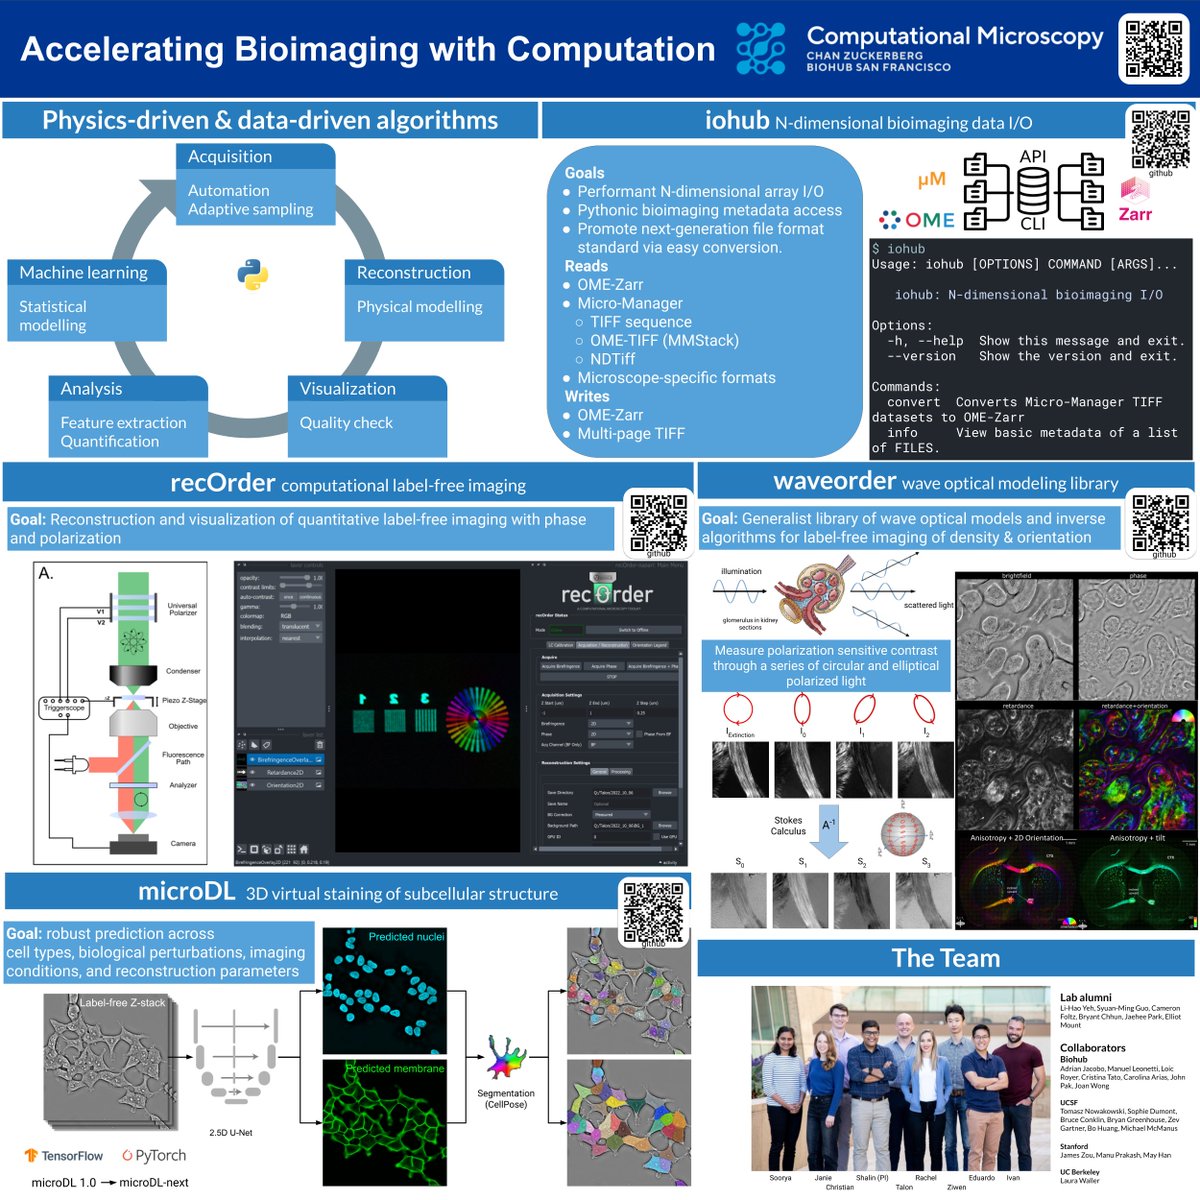 I am sharing my team's most active open-source projects in computational imaging and deep learning for bioimaging. We welcome users and contributors! This nice poster is courtesy of @edyoshikun and @ZW_Liu, presented at the recent @czbiohub confab.